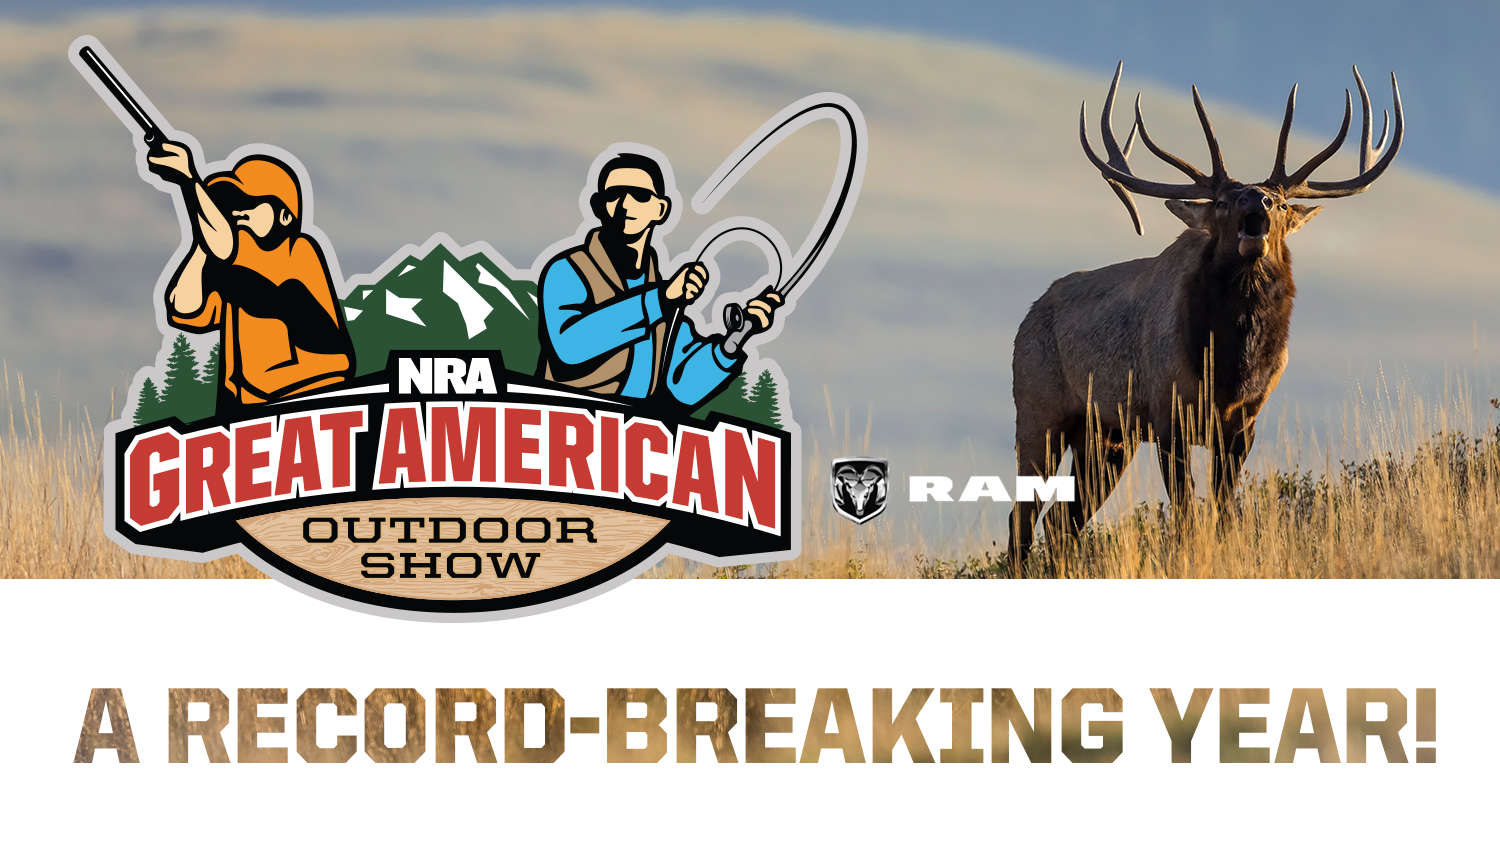 NRA's Sixth Annual Great American Outdoor Show Continues Successful Traditions